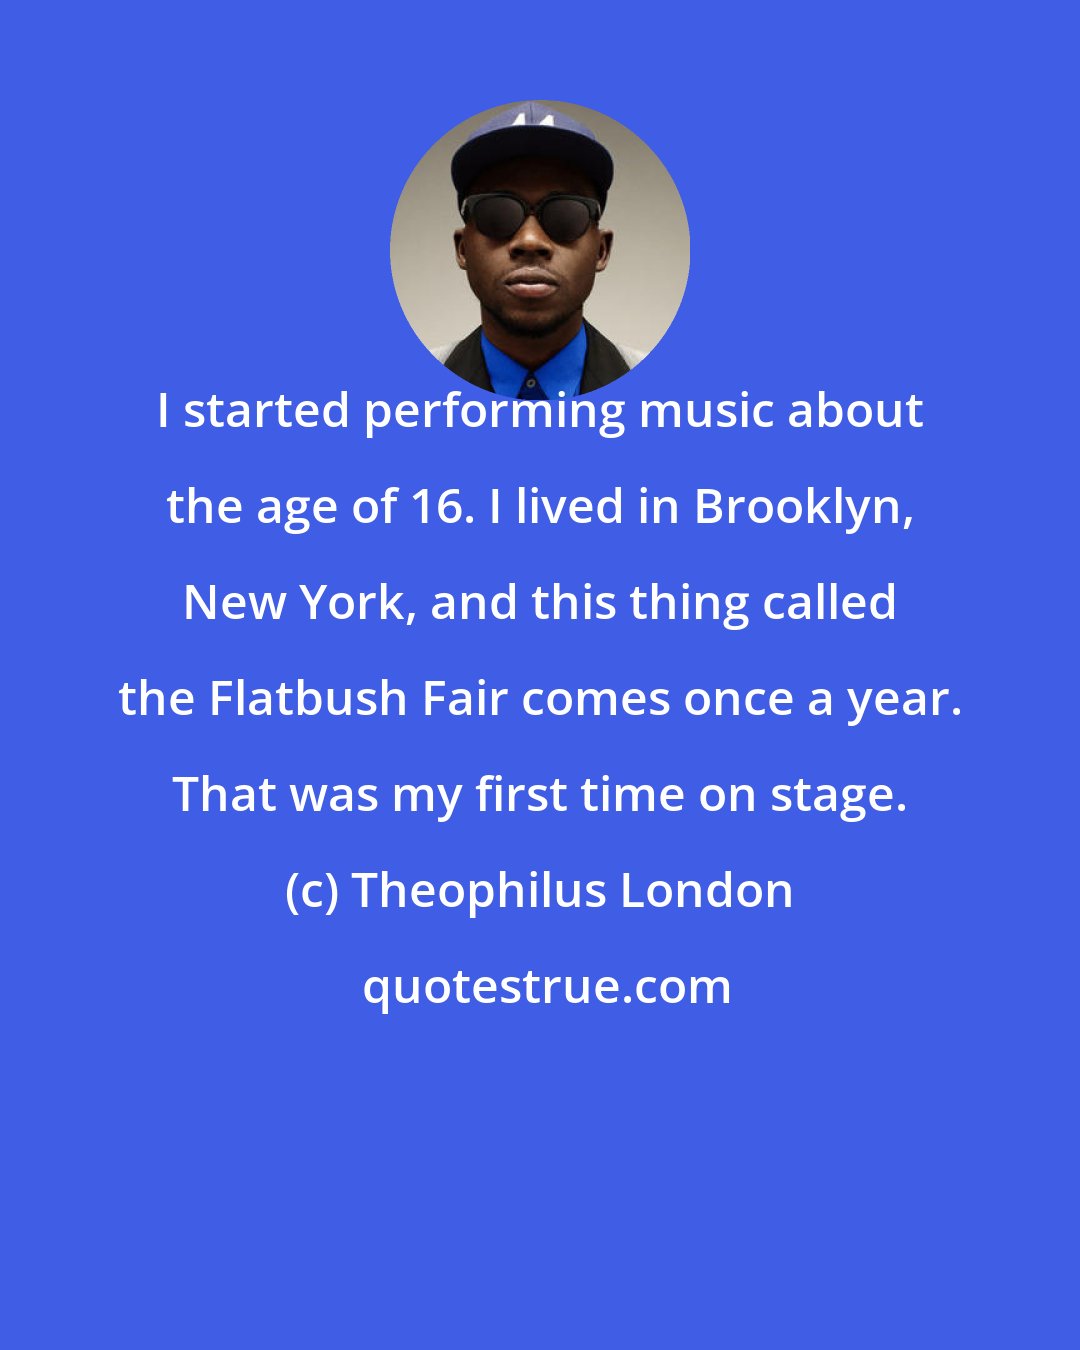 Theophilus London: I started performing music about the age of 16. I lived in Brooklyn, New York, and this thing called the Flatbush Fair comes once a year. That was my first time on stage.